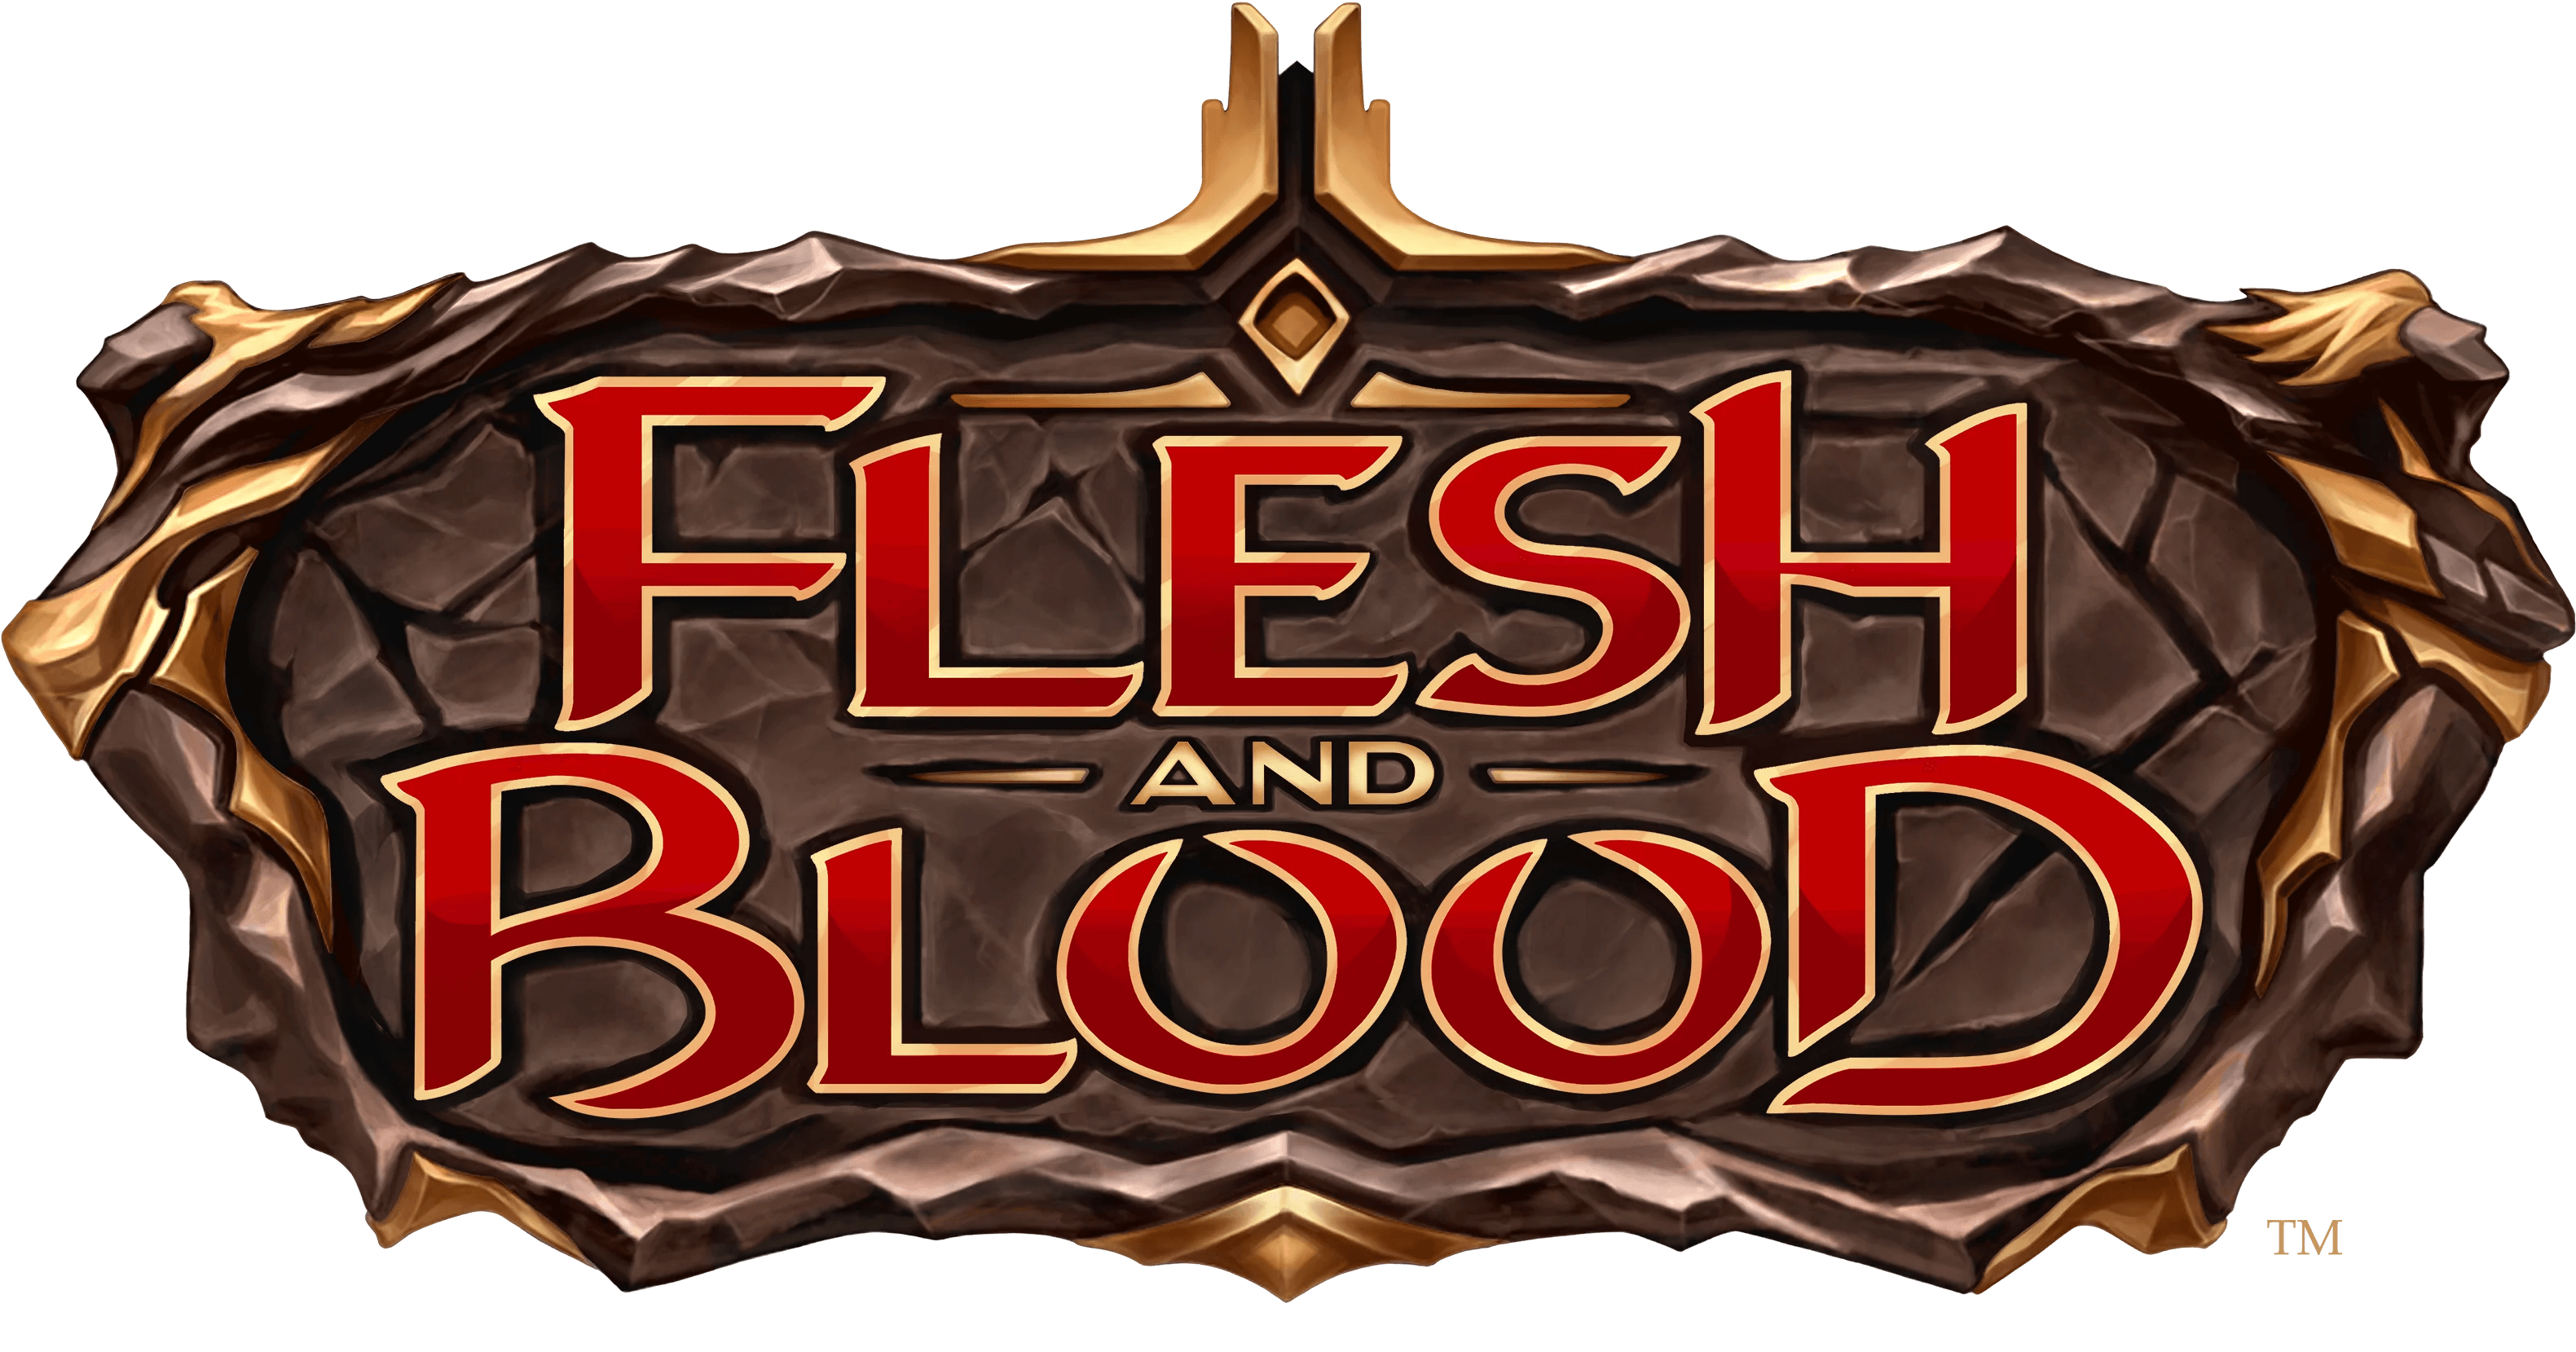 Flesh And Blood - Everfest - 1st Edition - Booster Pack (10 Cards) - Hobby Champion Inc